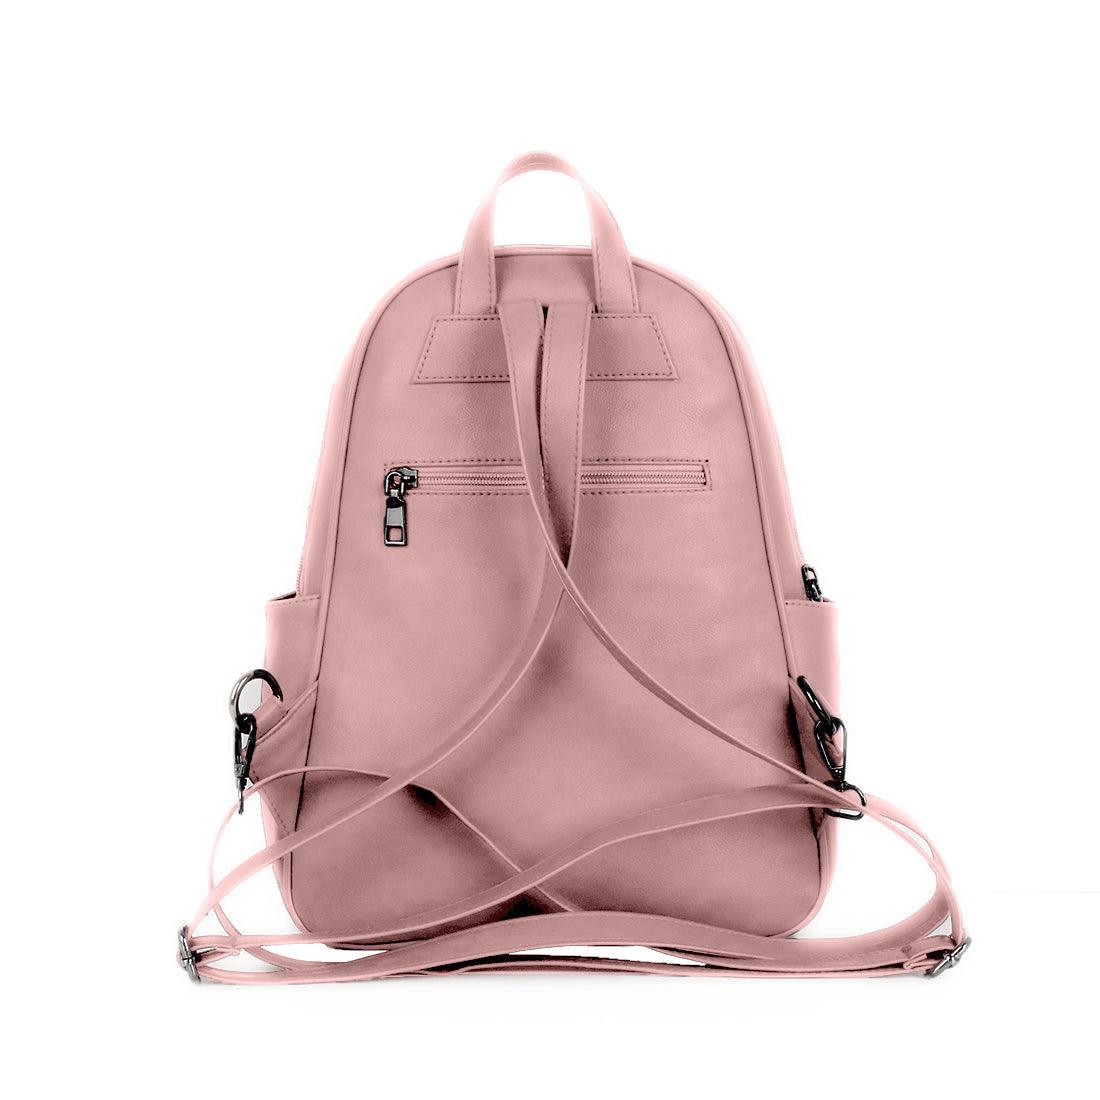 Rose Mixed Backpack Cosmic Dreams - CANVAEGYPT